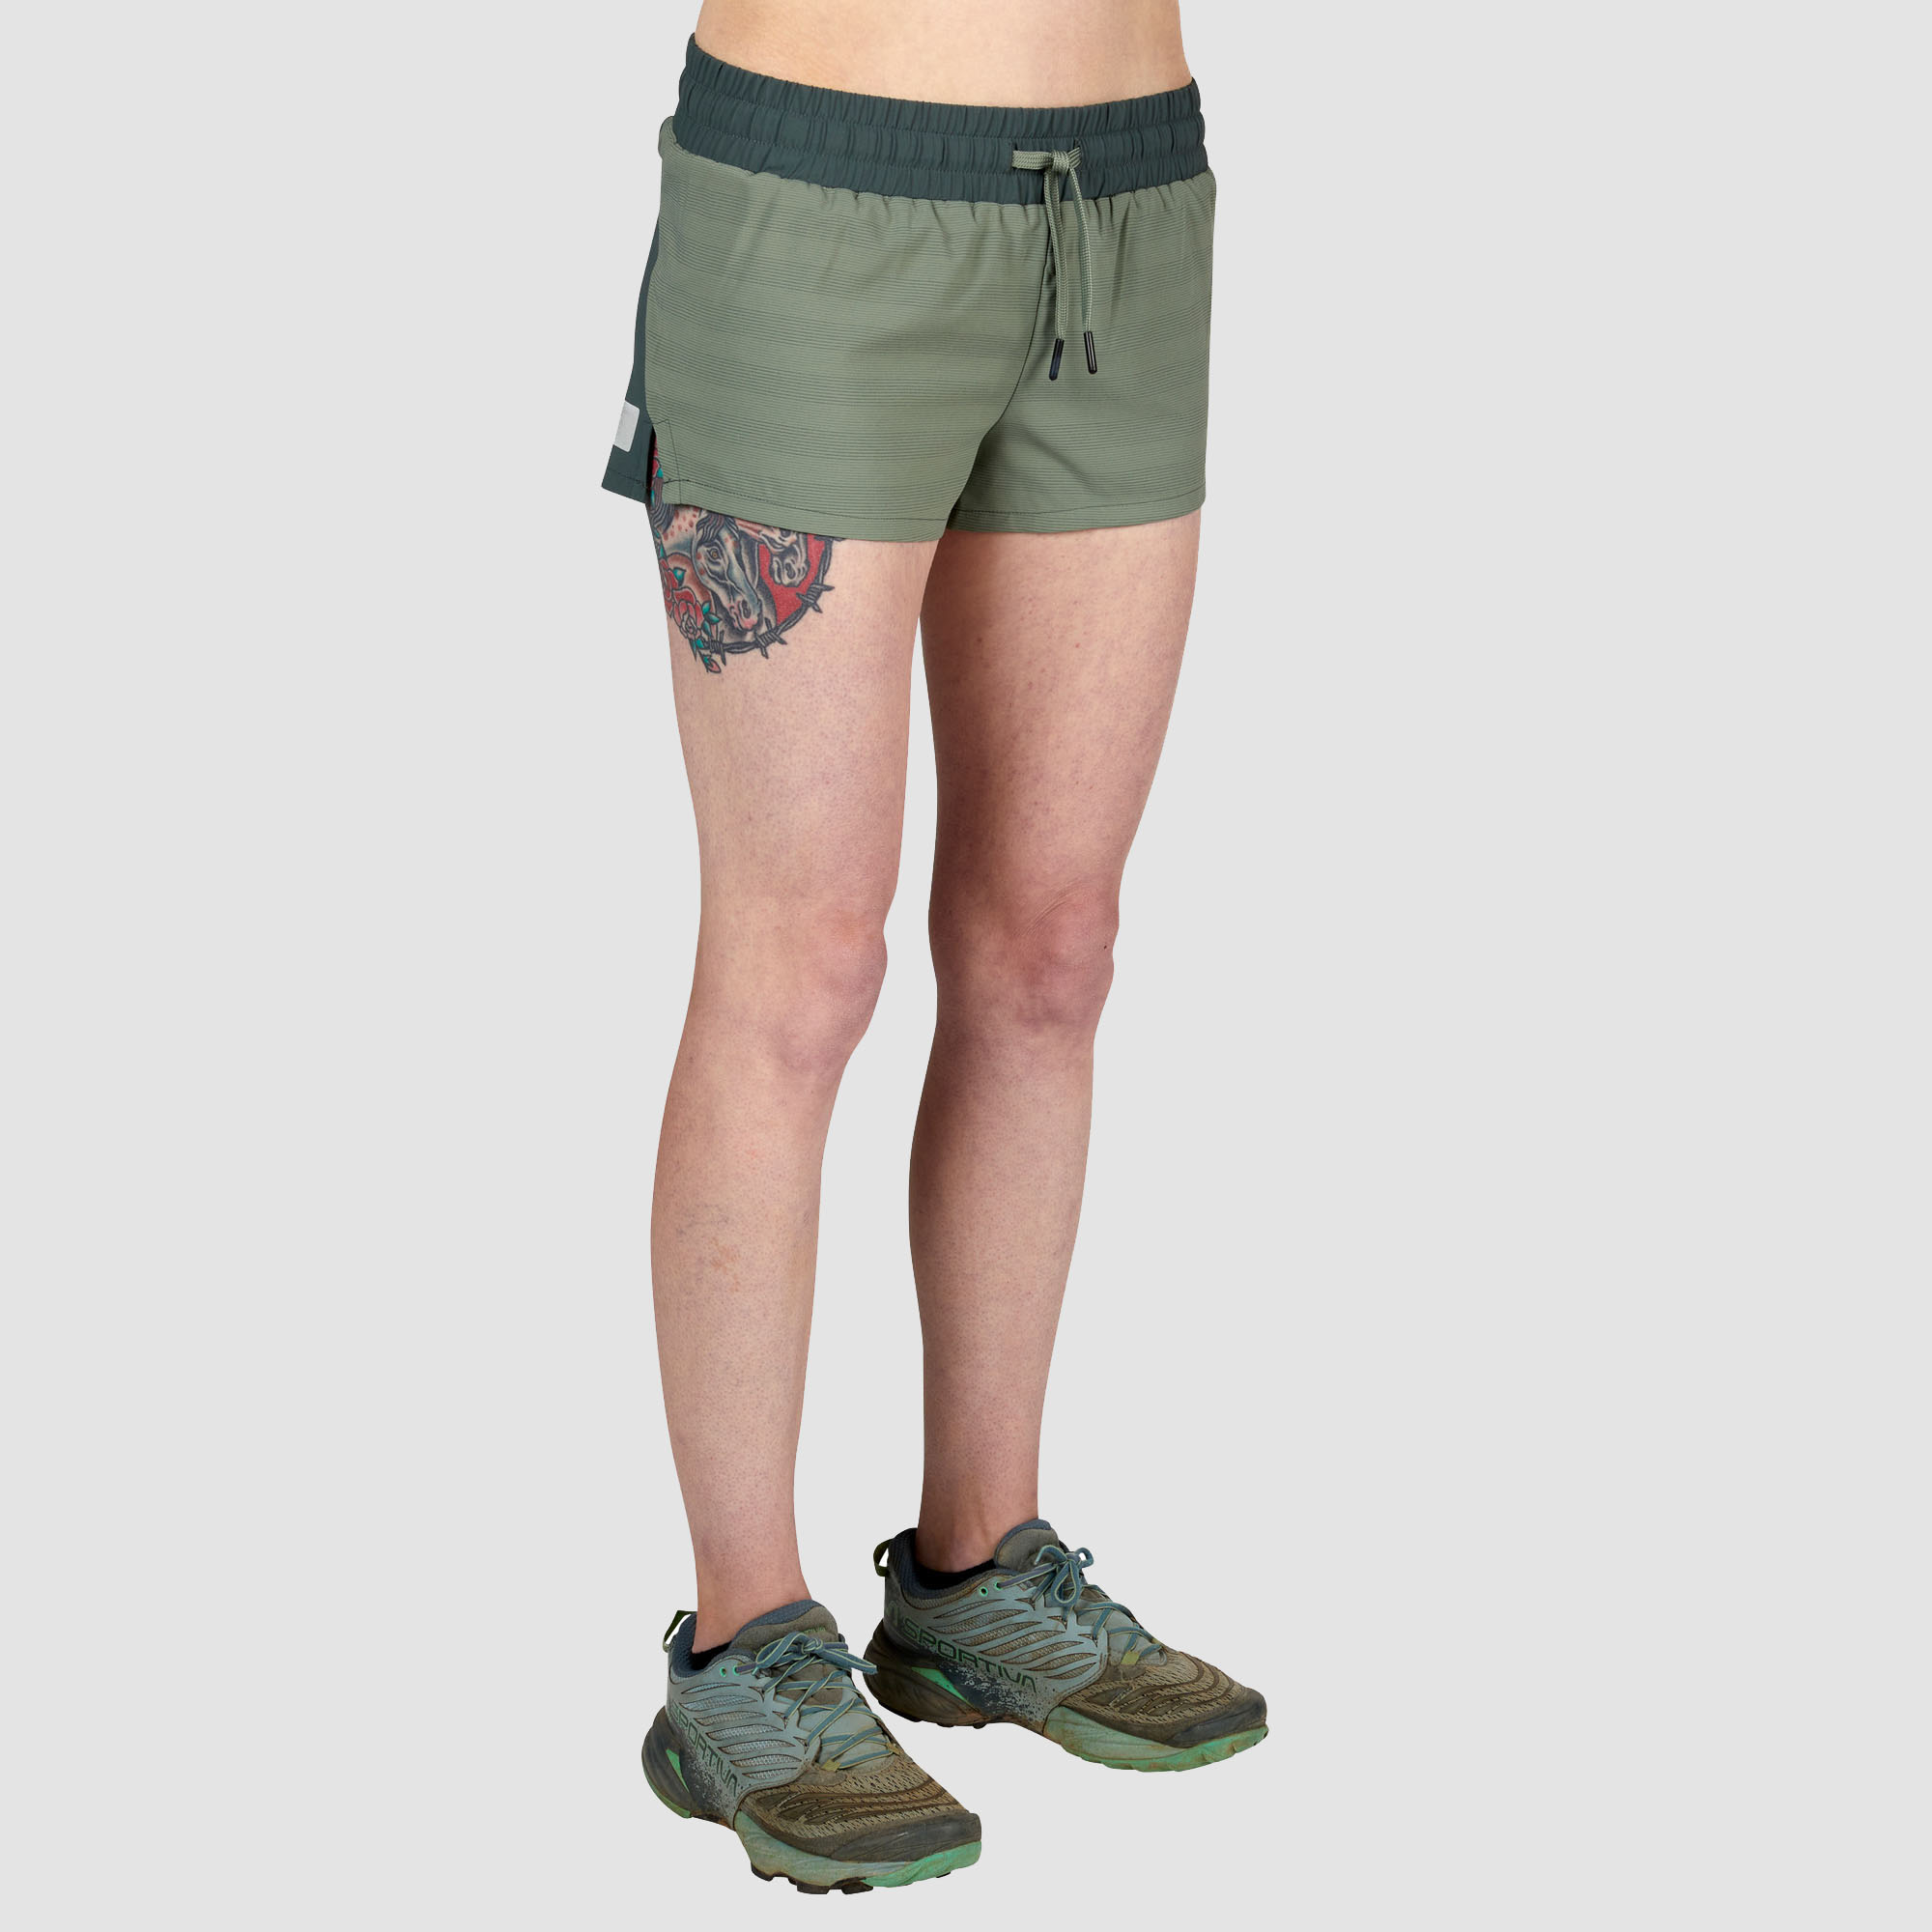 Ultimate Direction Women's Stratus Short - Prior Year in Camo Green Size Large